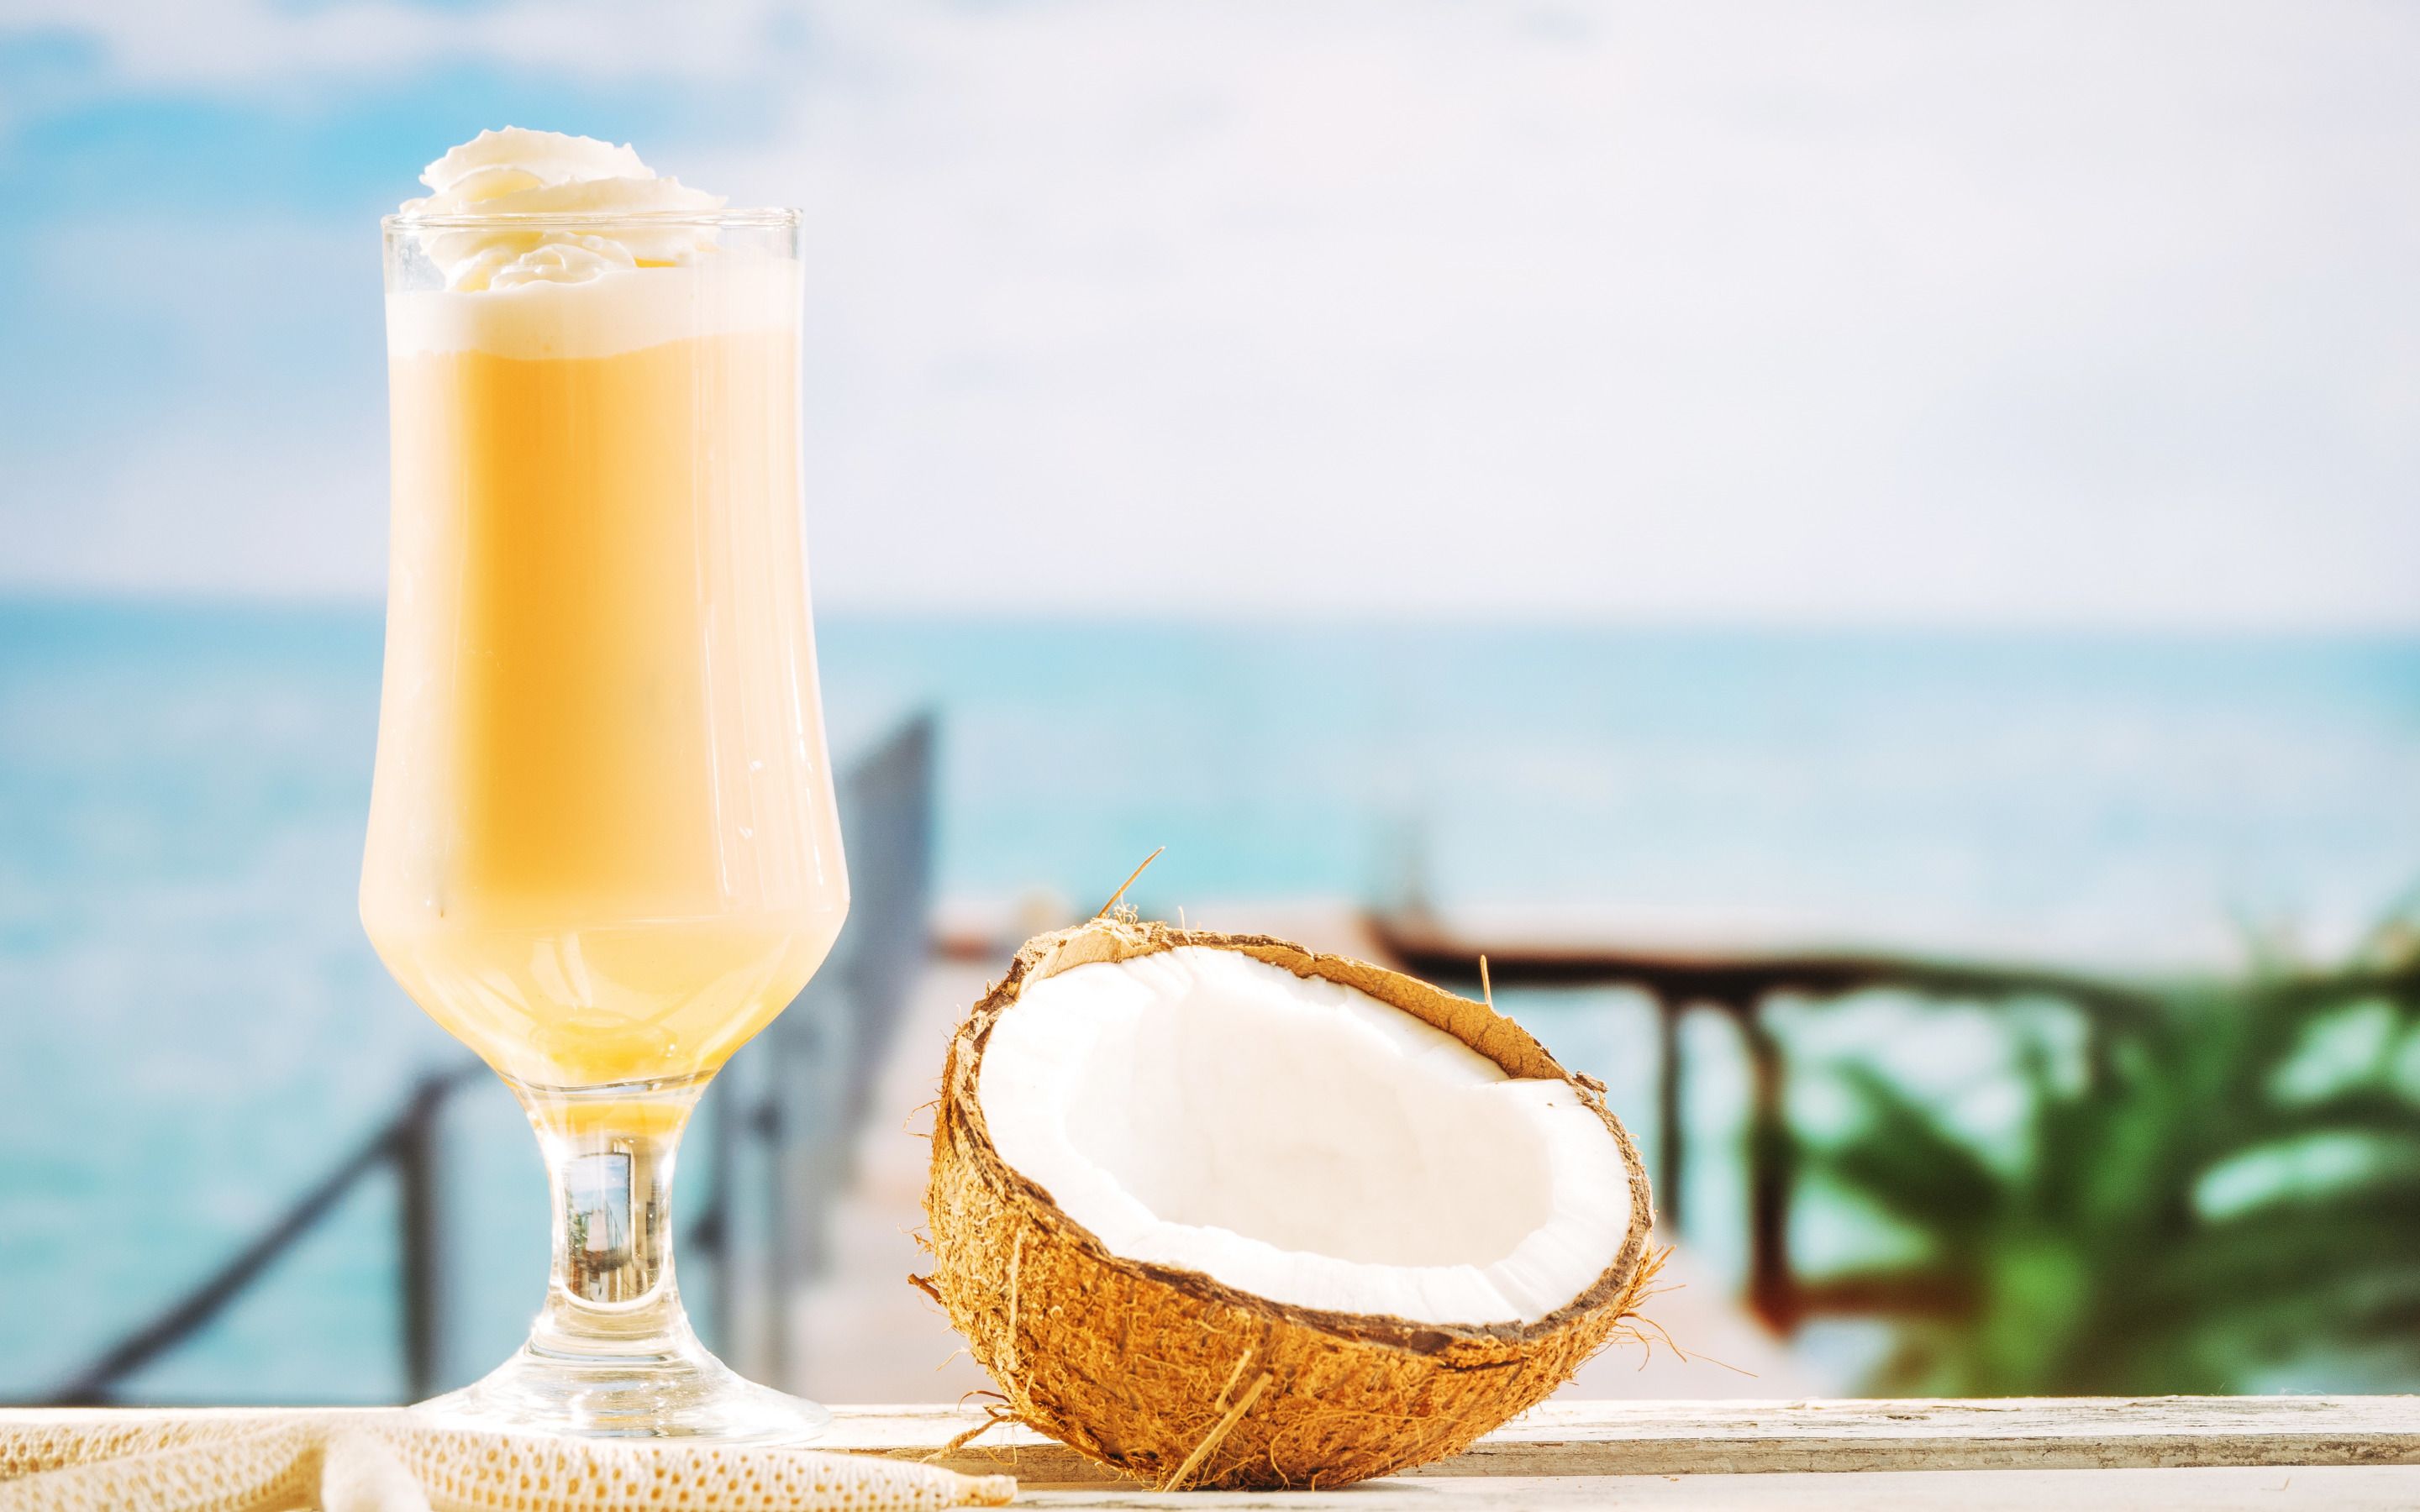 Download wallpaper Pina colada, traditional caribbean cocktail, coconut, summer, beach, different drinks for desktop with resolution 2880x1800. High Quality HD picture wallpaper